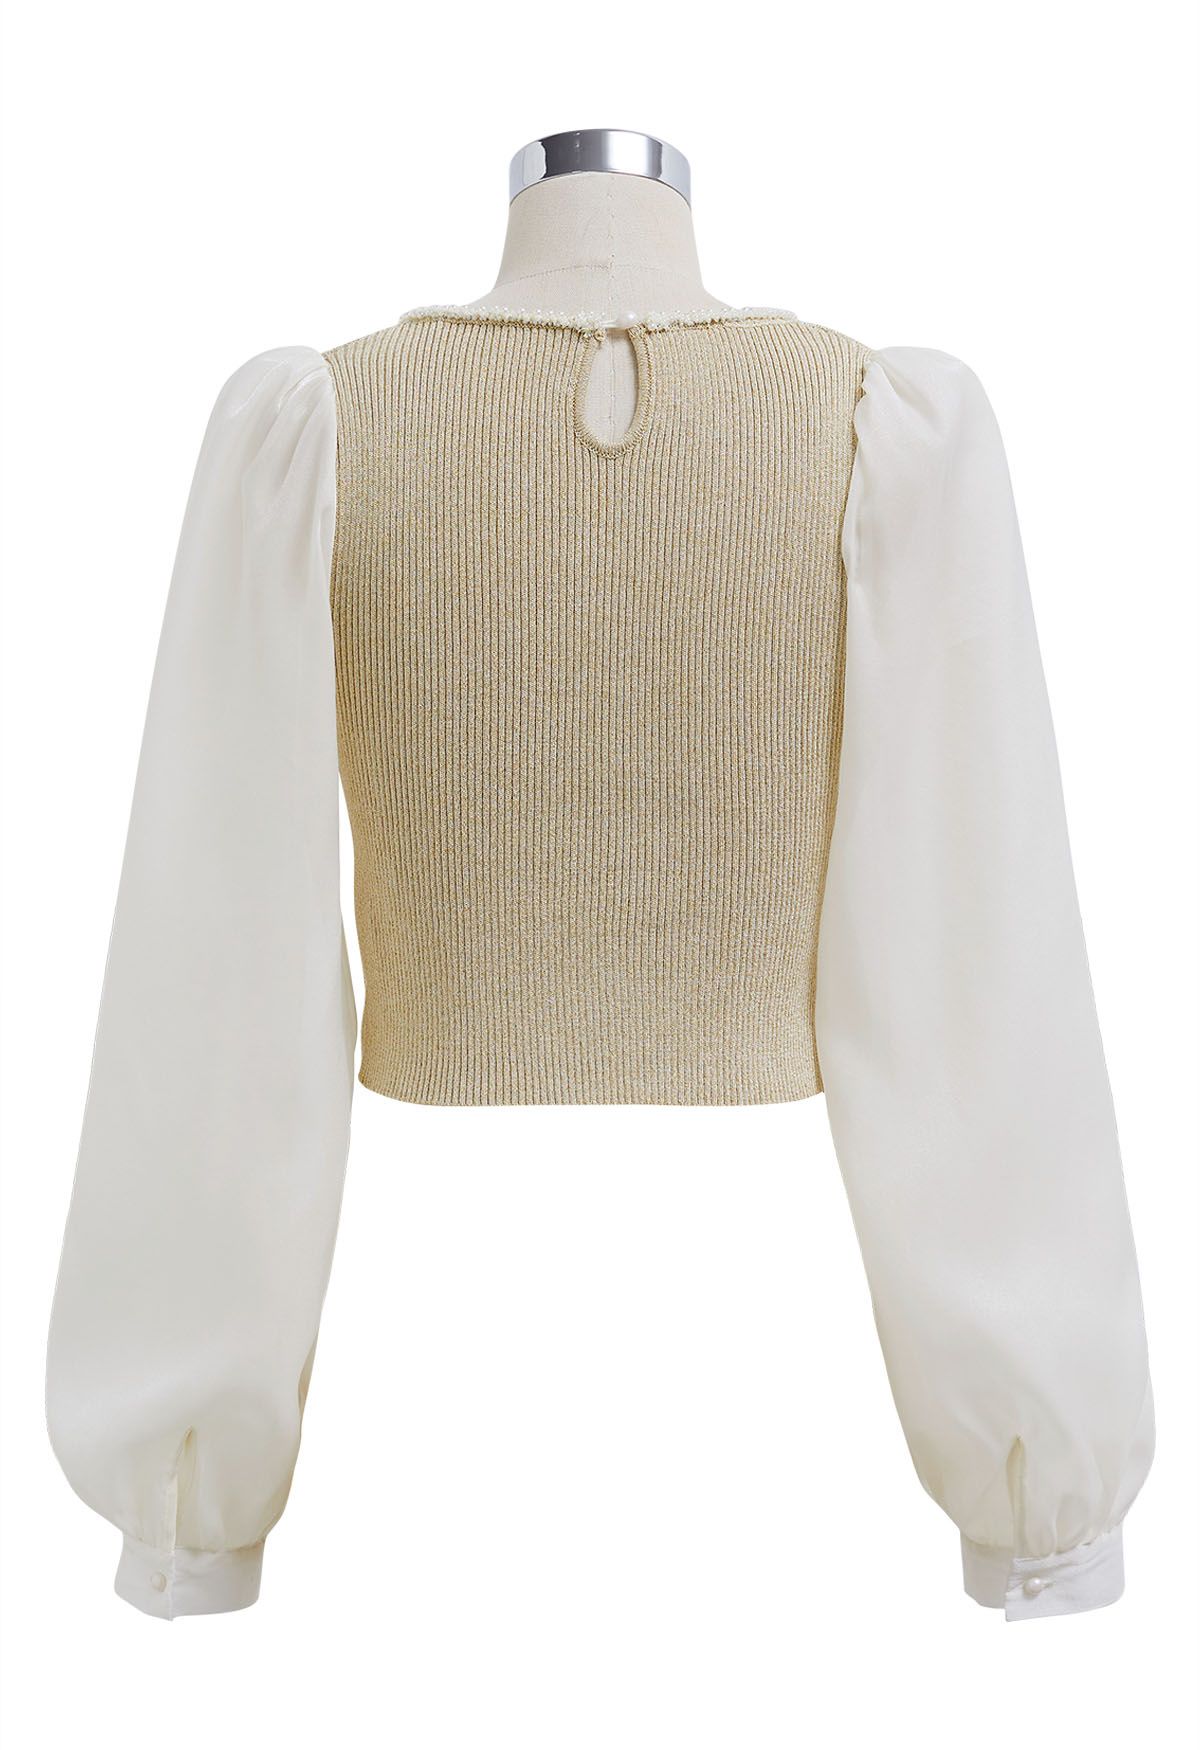 Beaded Square Neck Spliced Puff Sleeve Knit Top in Sand